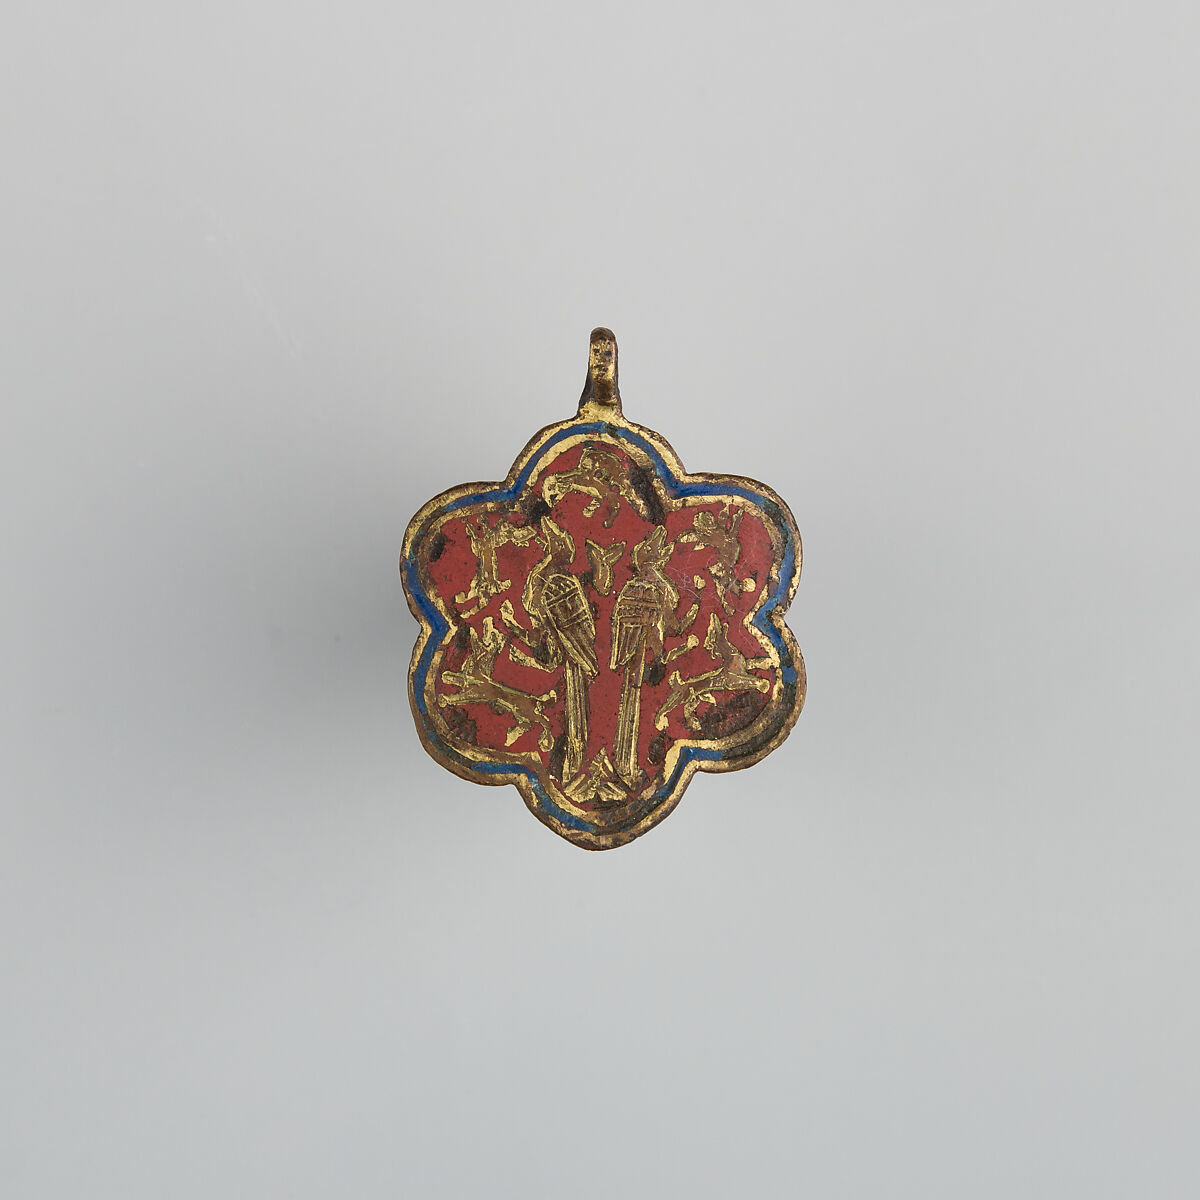 Badge or Harness Pendant, Copper, gold, enamel, possibly Spanish 